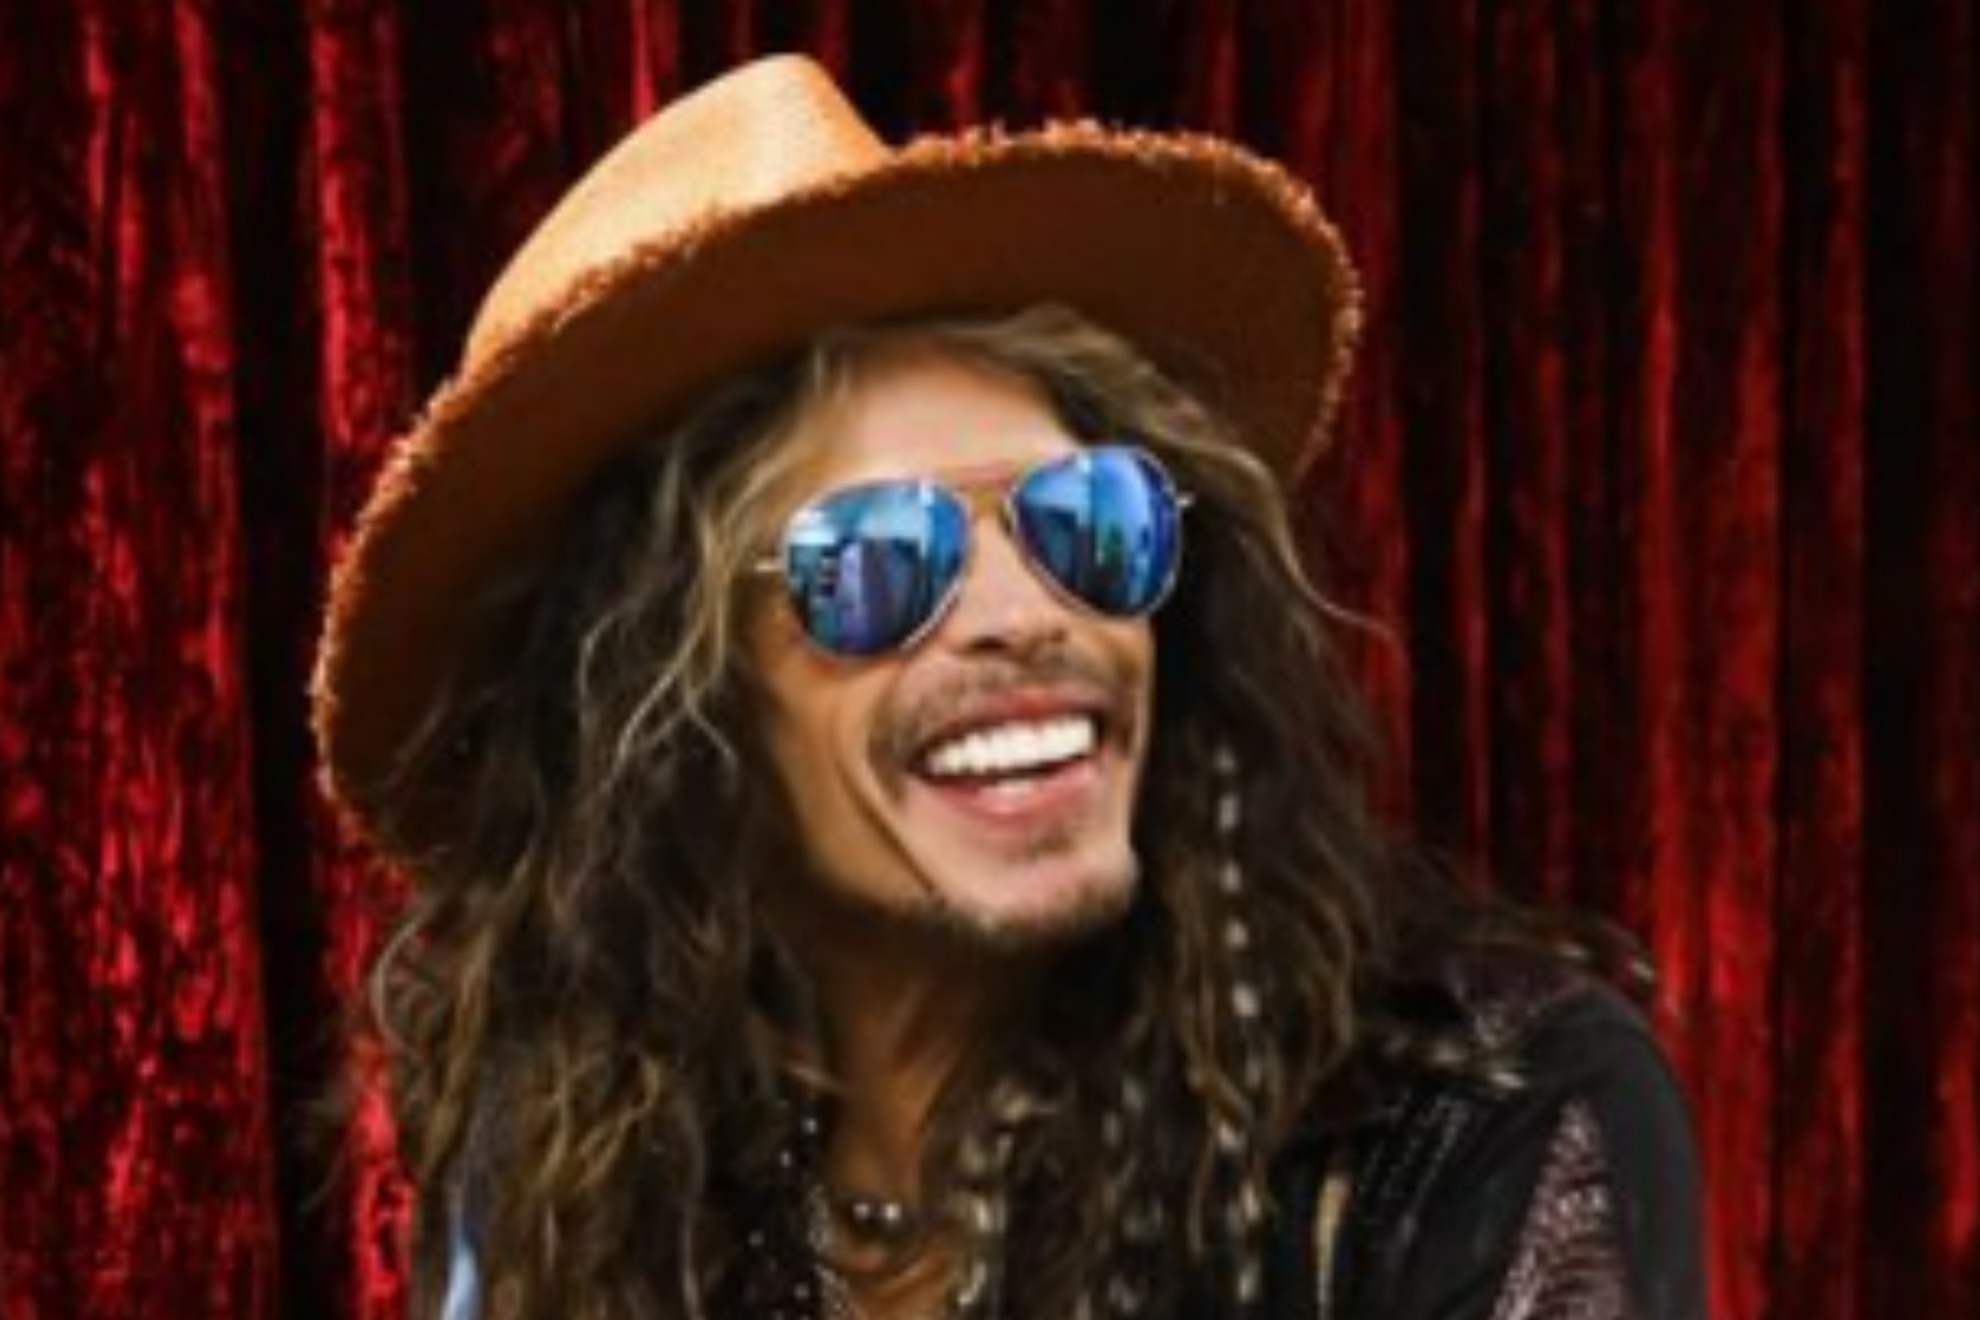 Steven Tyler from Aerosmith cancels Las Vegas show last minute due to an unknown illness